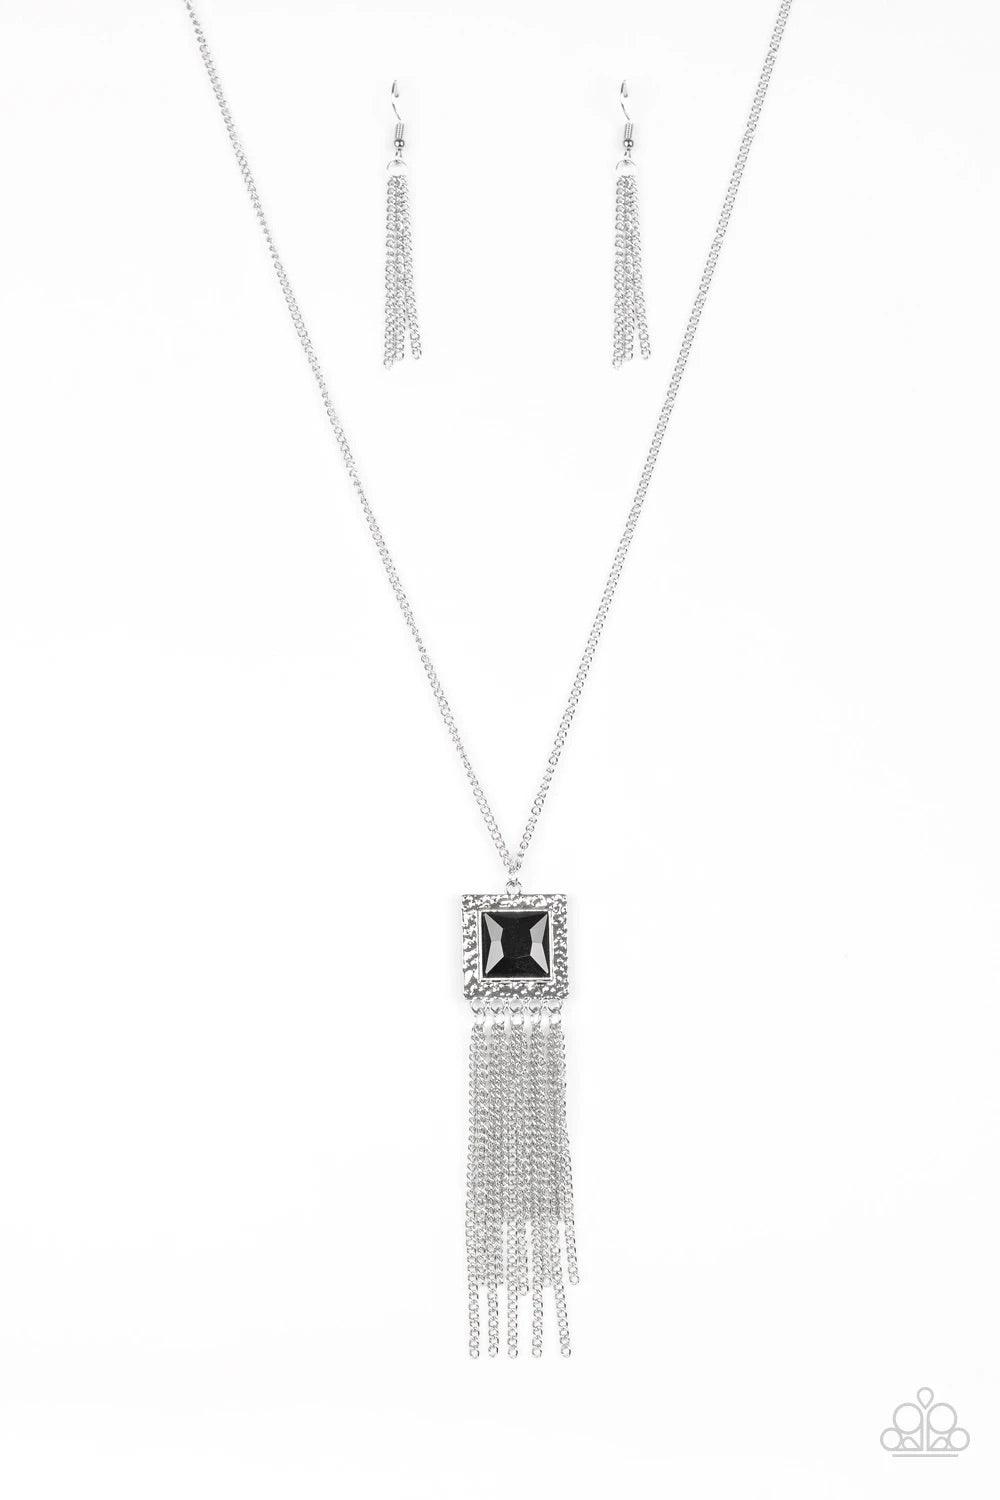 Paparazzi Accessories Shimmer Sensei - Black Swinging from the bottom of a lengthened silver chain, a delicately hammered square frame gives way to a shimmery silver fringe. Featuring a regal square cut, a glittery black gem is pressed into the center of